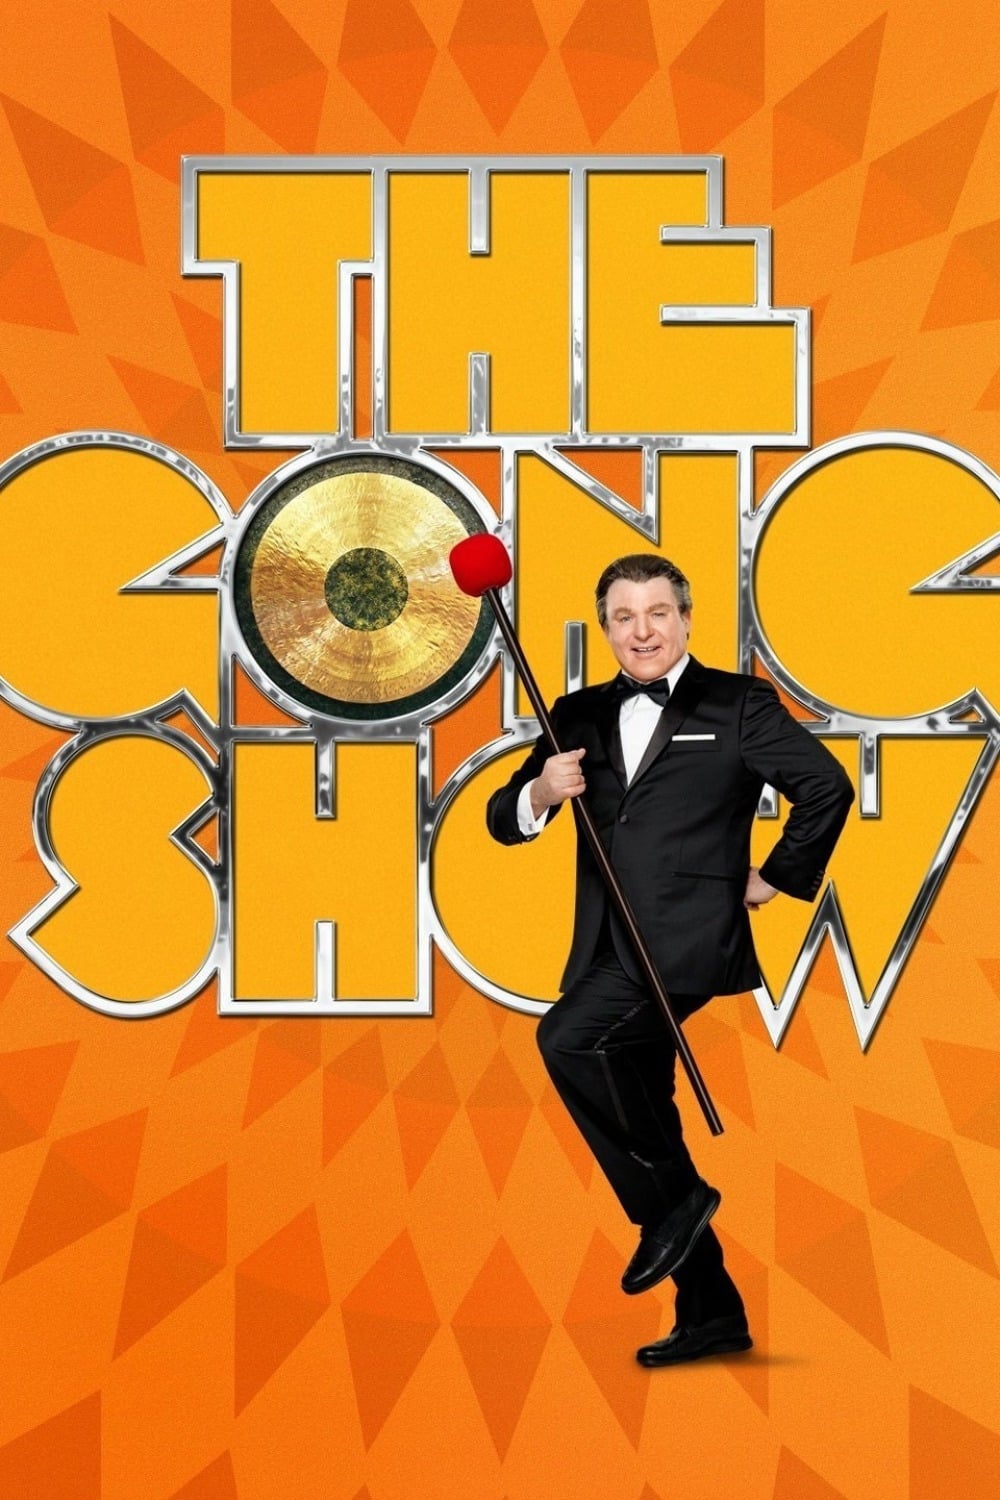 The Gong Show (2017)